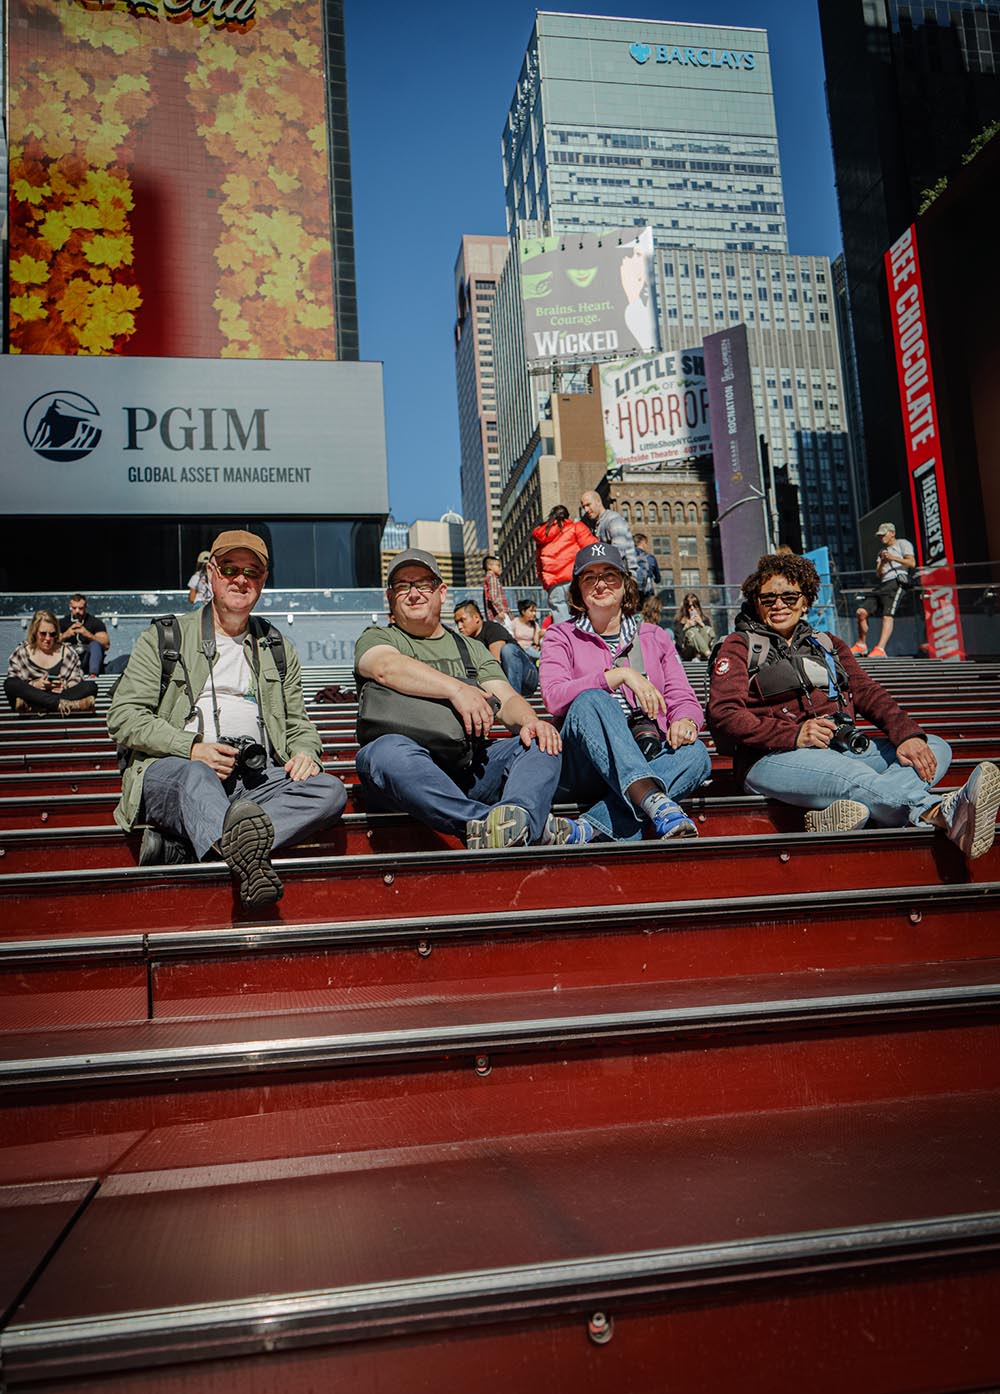 Another selfie on the Red Steps at Times Square